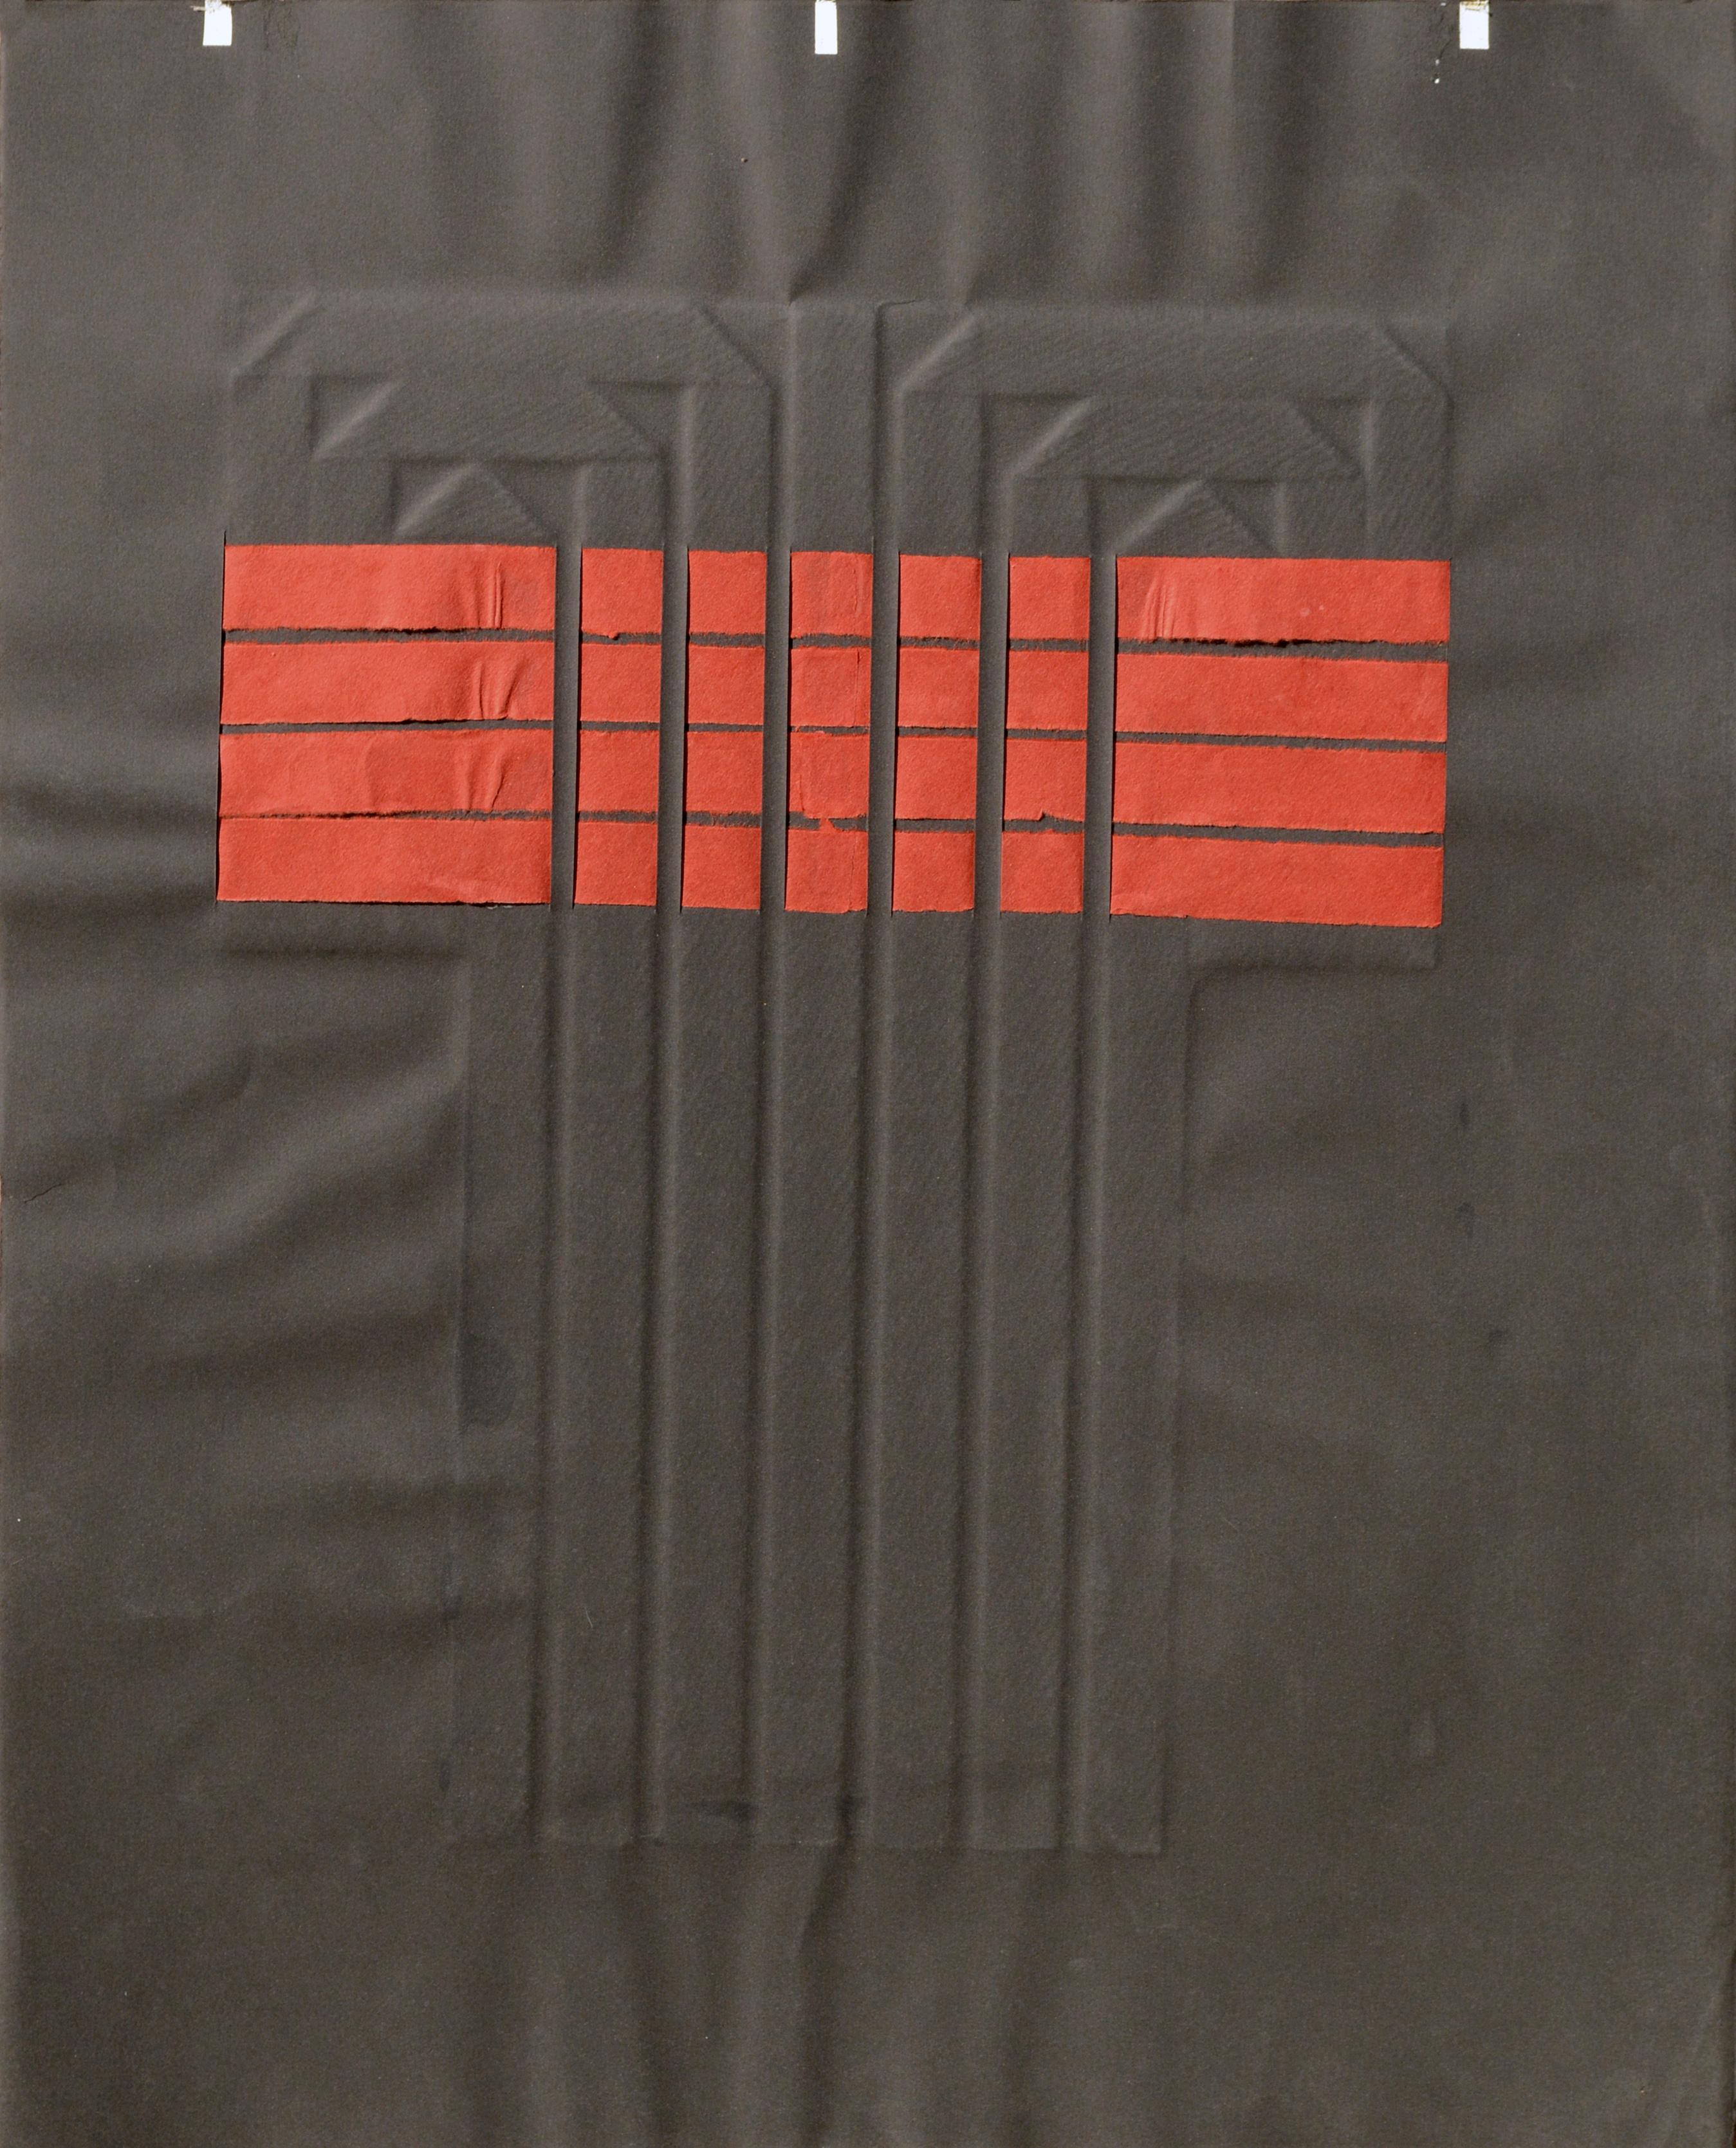 Paper applique kimono with red paper strips by Patricia A. Pearce (American, b. 1948). Numbered, titled, and signed along the bottom edge (